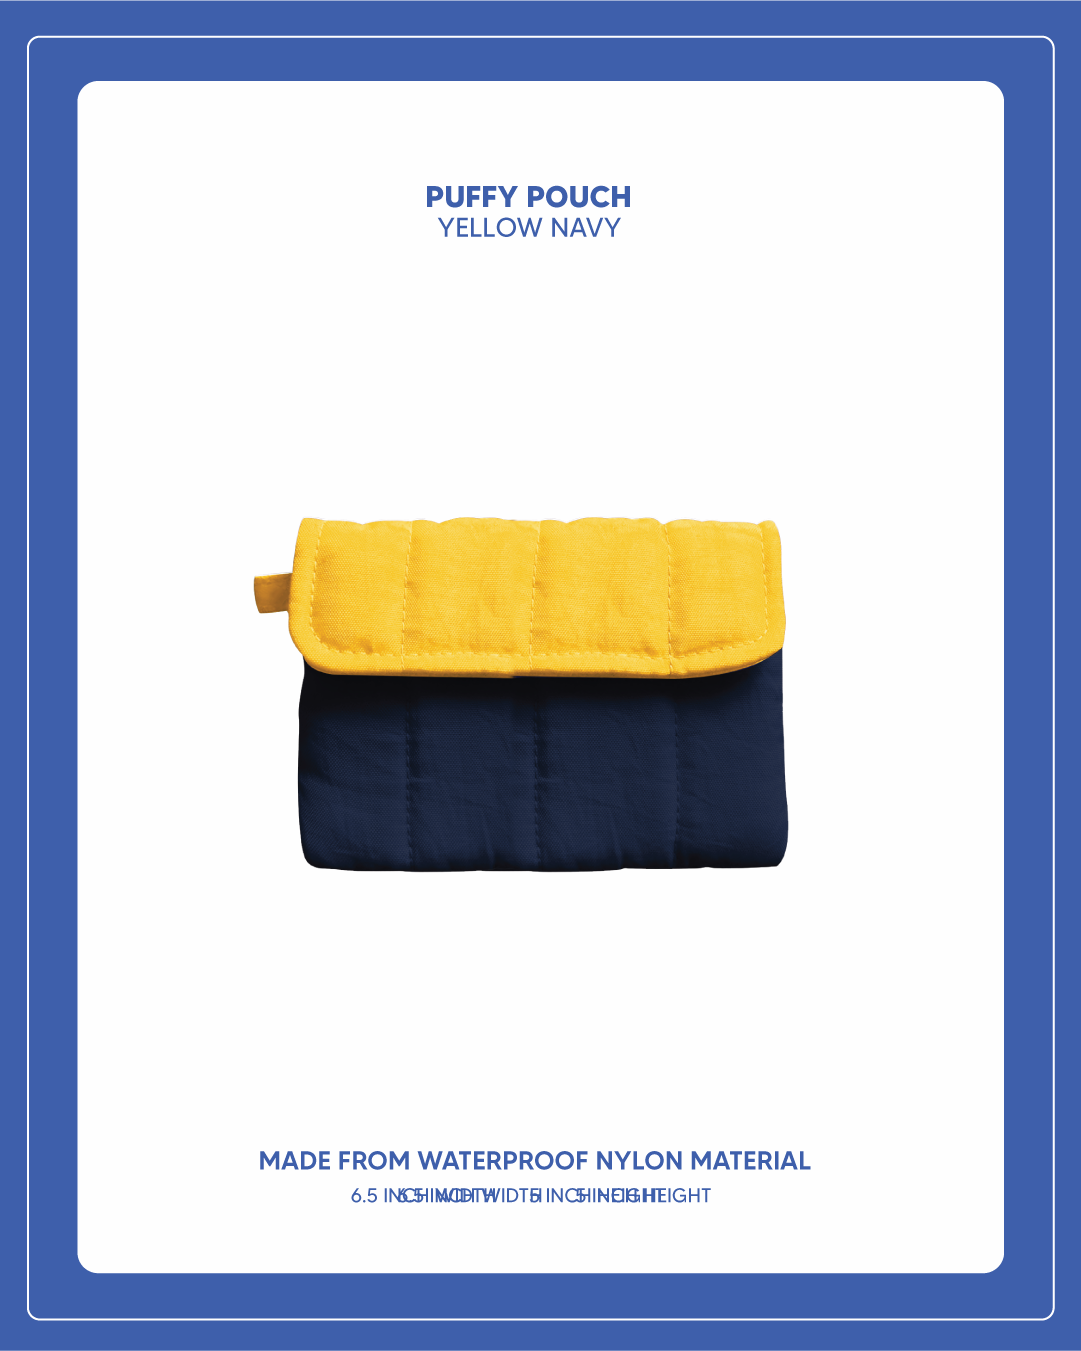 Puffy Pouch - Yellow Navy